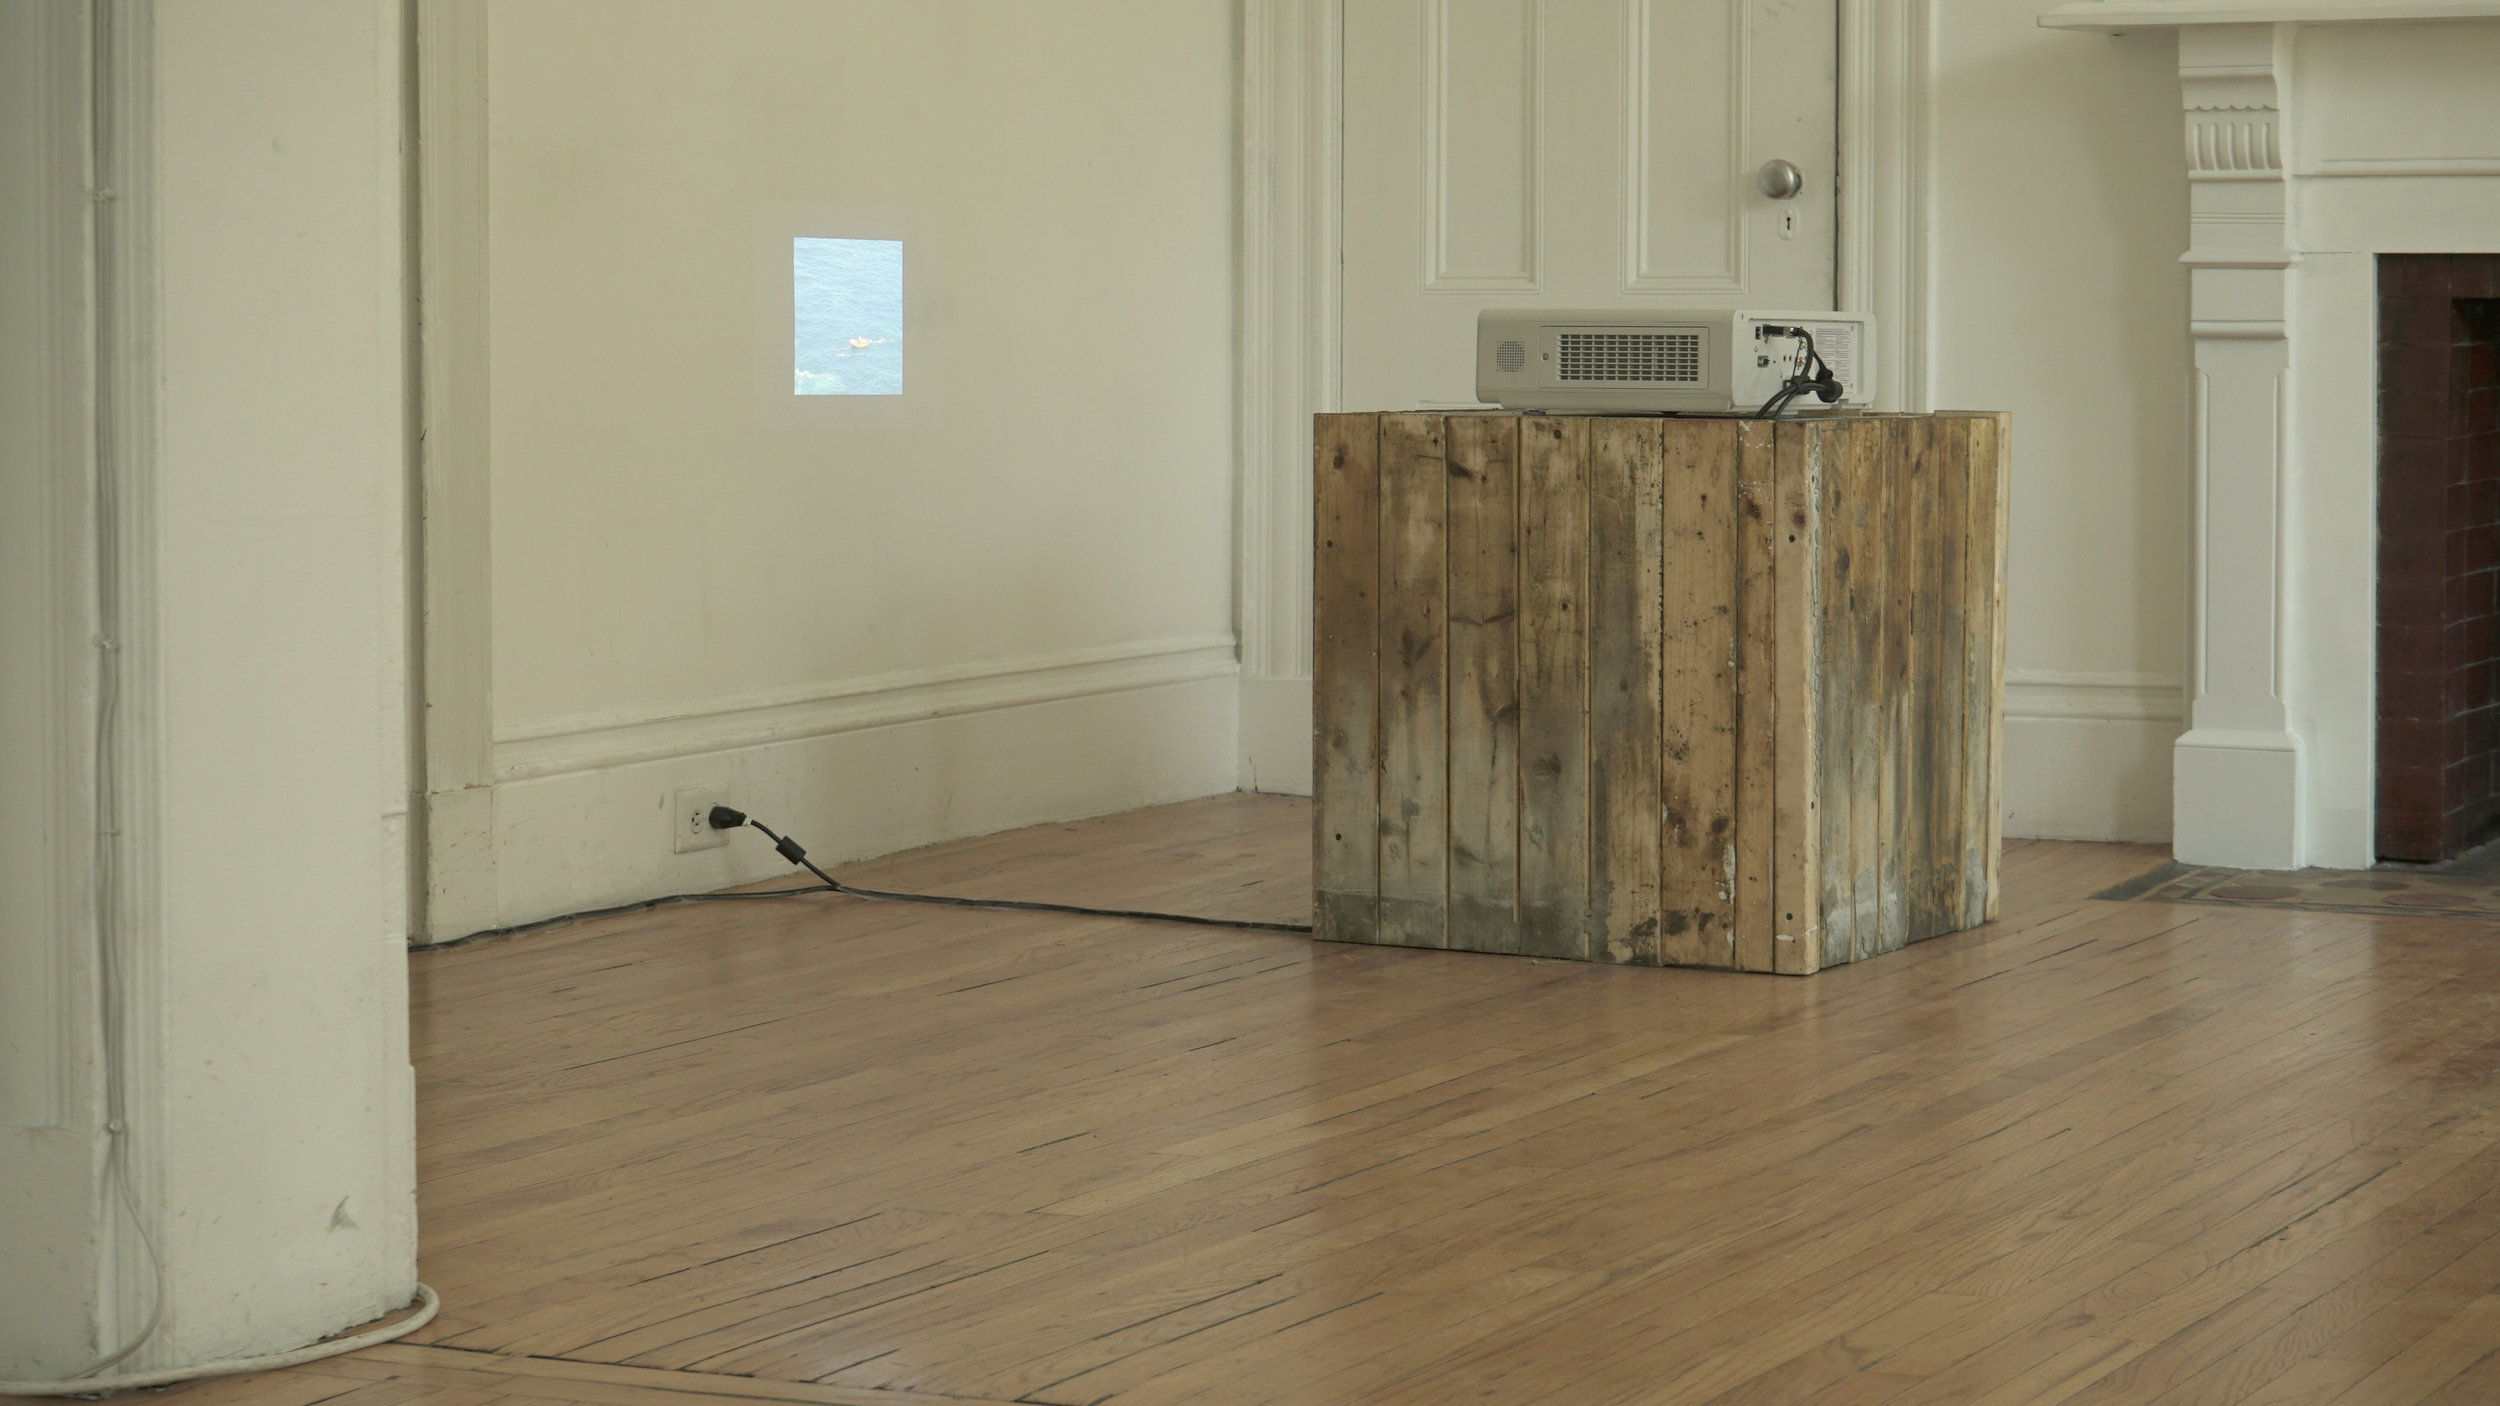  July 2019. Digitized 16mm film projection and wooden formwork pedestal. Kirkland Gallery, Cambridge, MA. 